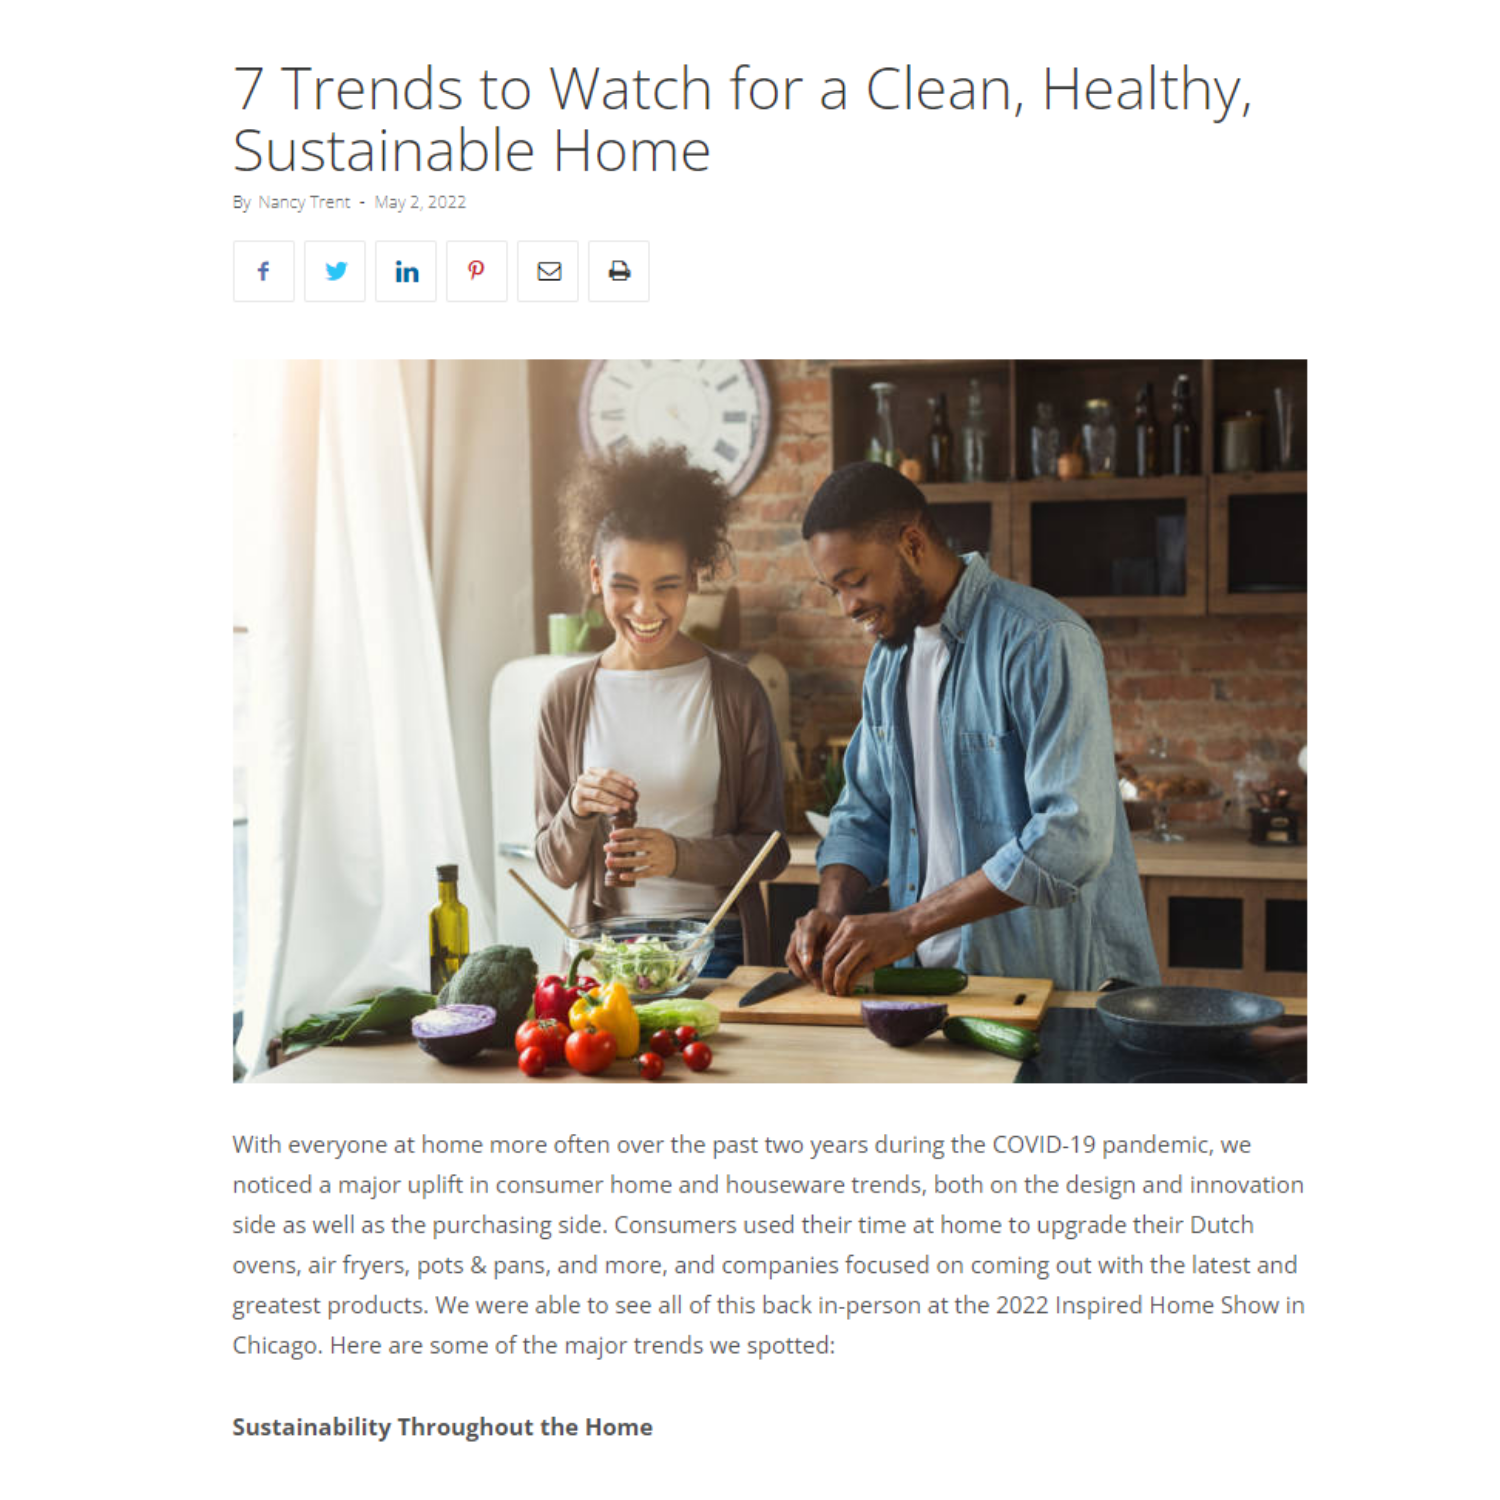 7 Trends to Watch for a Clean, Healthy, Sustainable Home